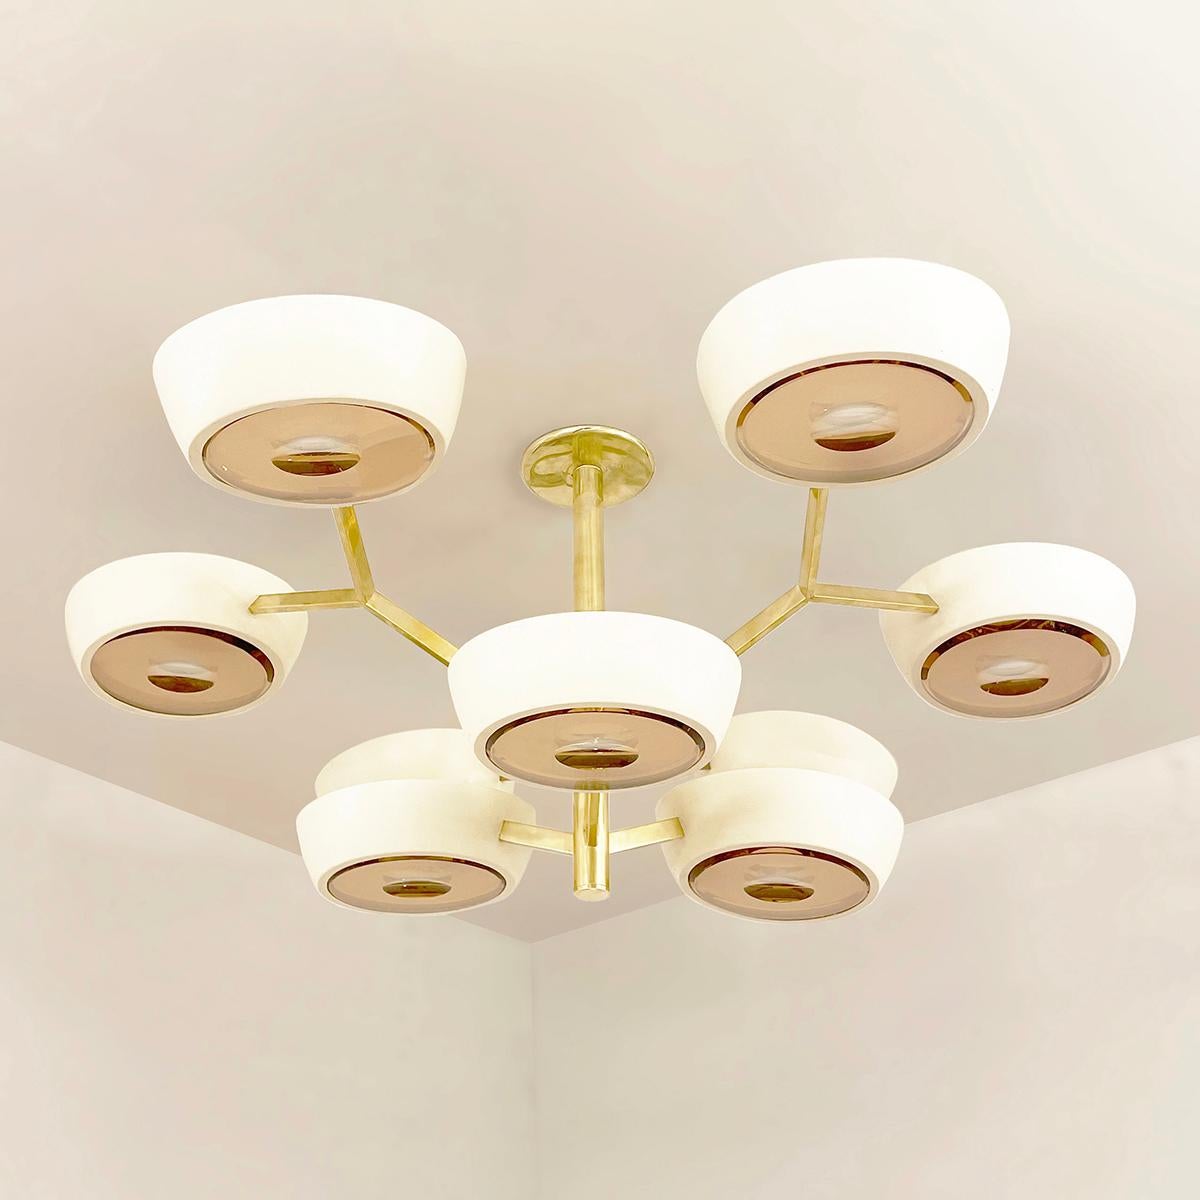 The Rose ceiling light is distinguished by its branching two-tiered frame ending with clean and modern shades. With the option to customize the color of the shades, the finish of the metal and the type of glass, the Rose is one of our most adaptable